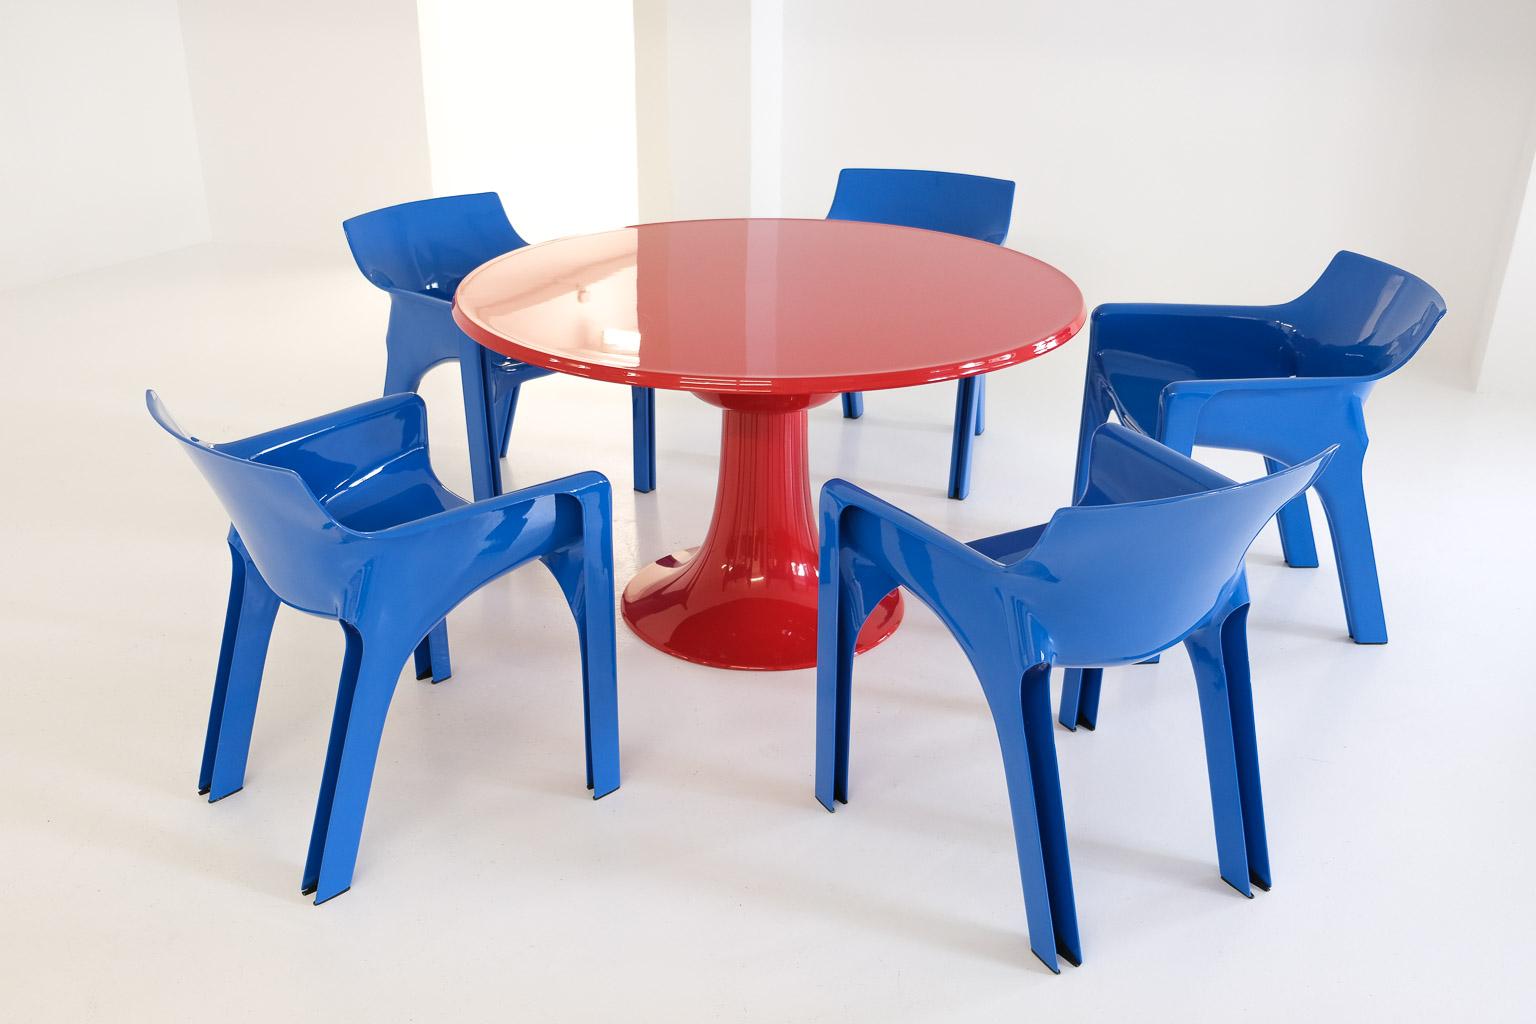 a famous zapf ‚säulentisch‘ (column table), an early version with slanted edge (probably 1967, later the tables were manufactured with round edges). repainted in a classic red.

otto zapf was recently honoured as a ‚pioneer of german design‘ with an